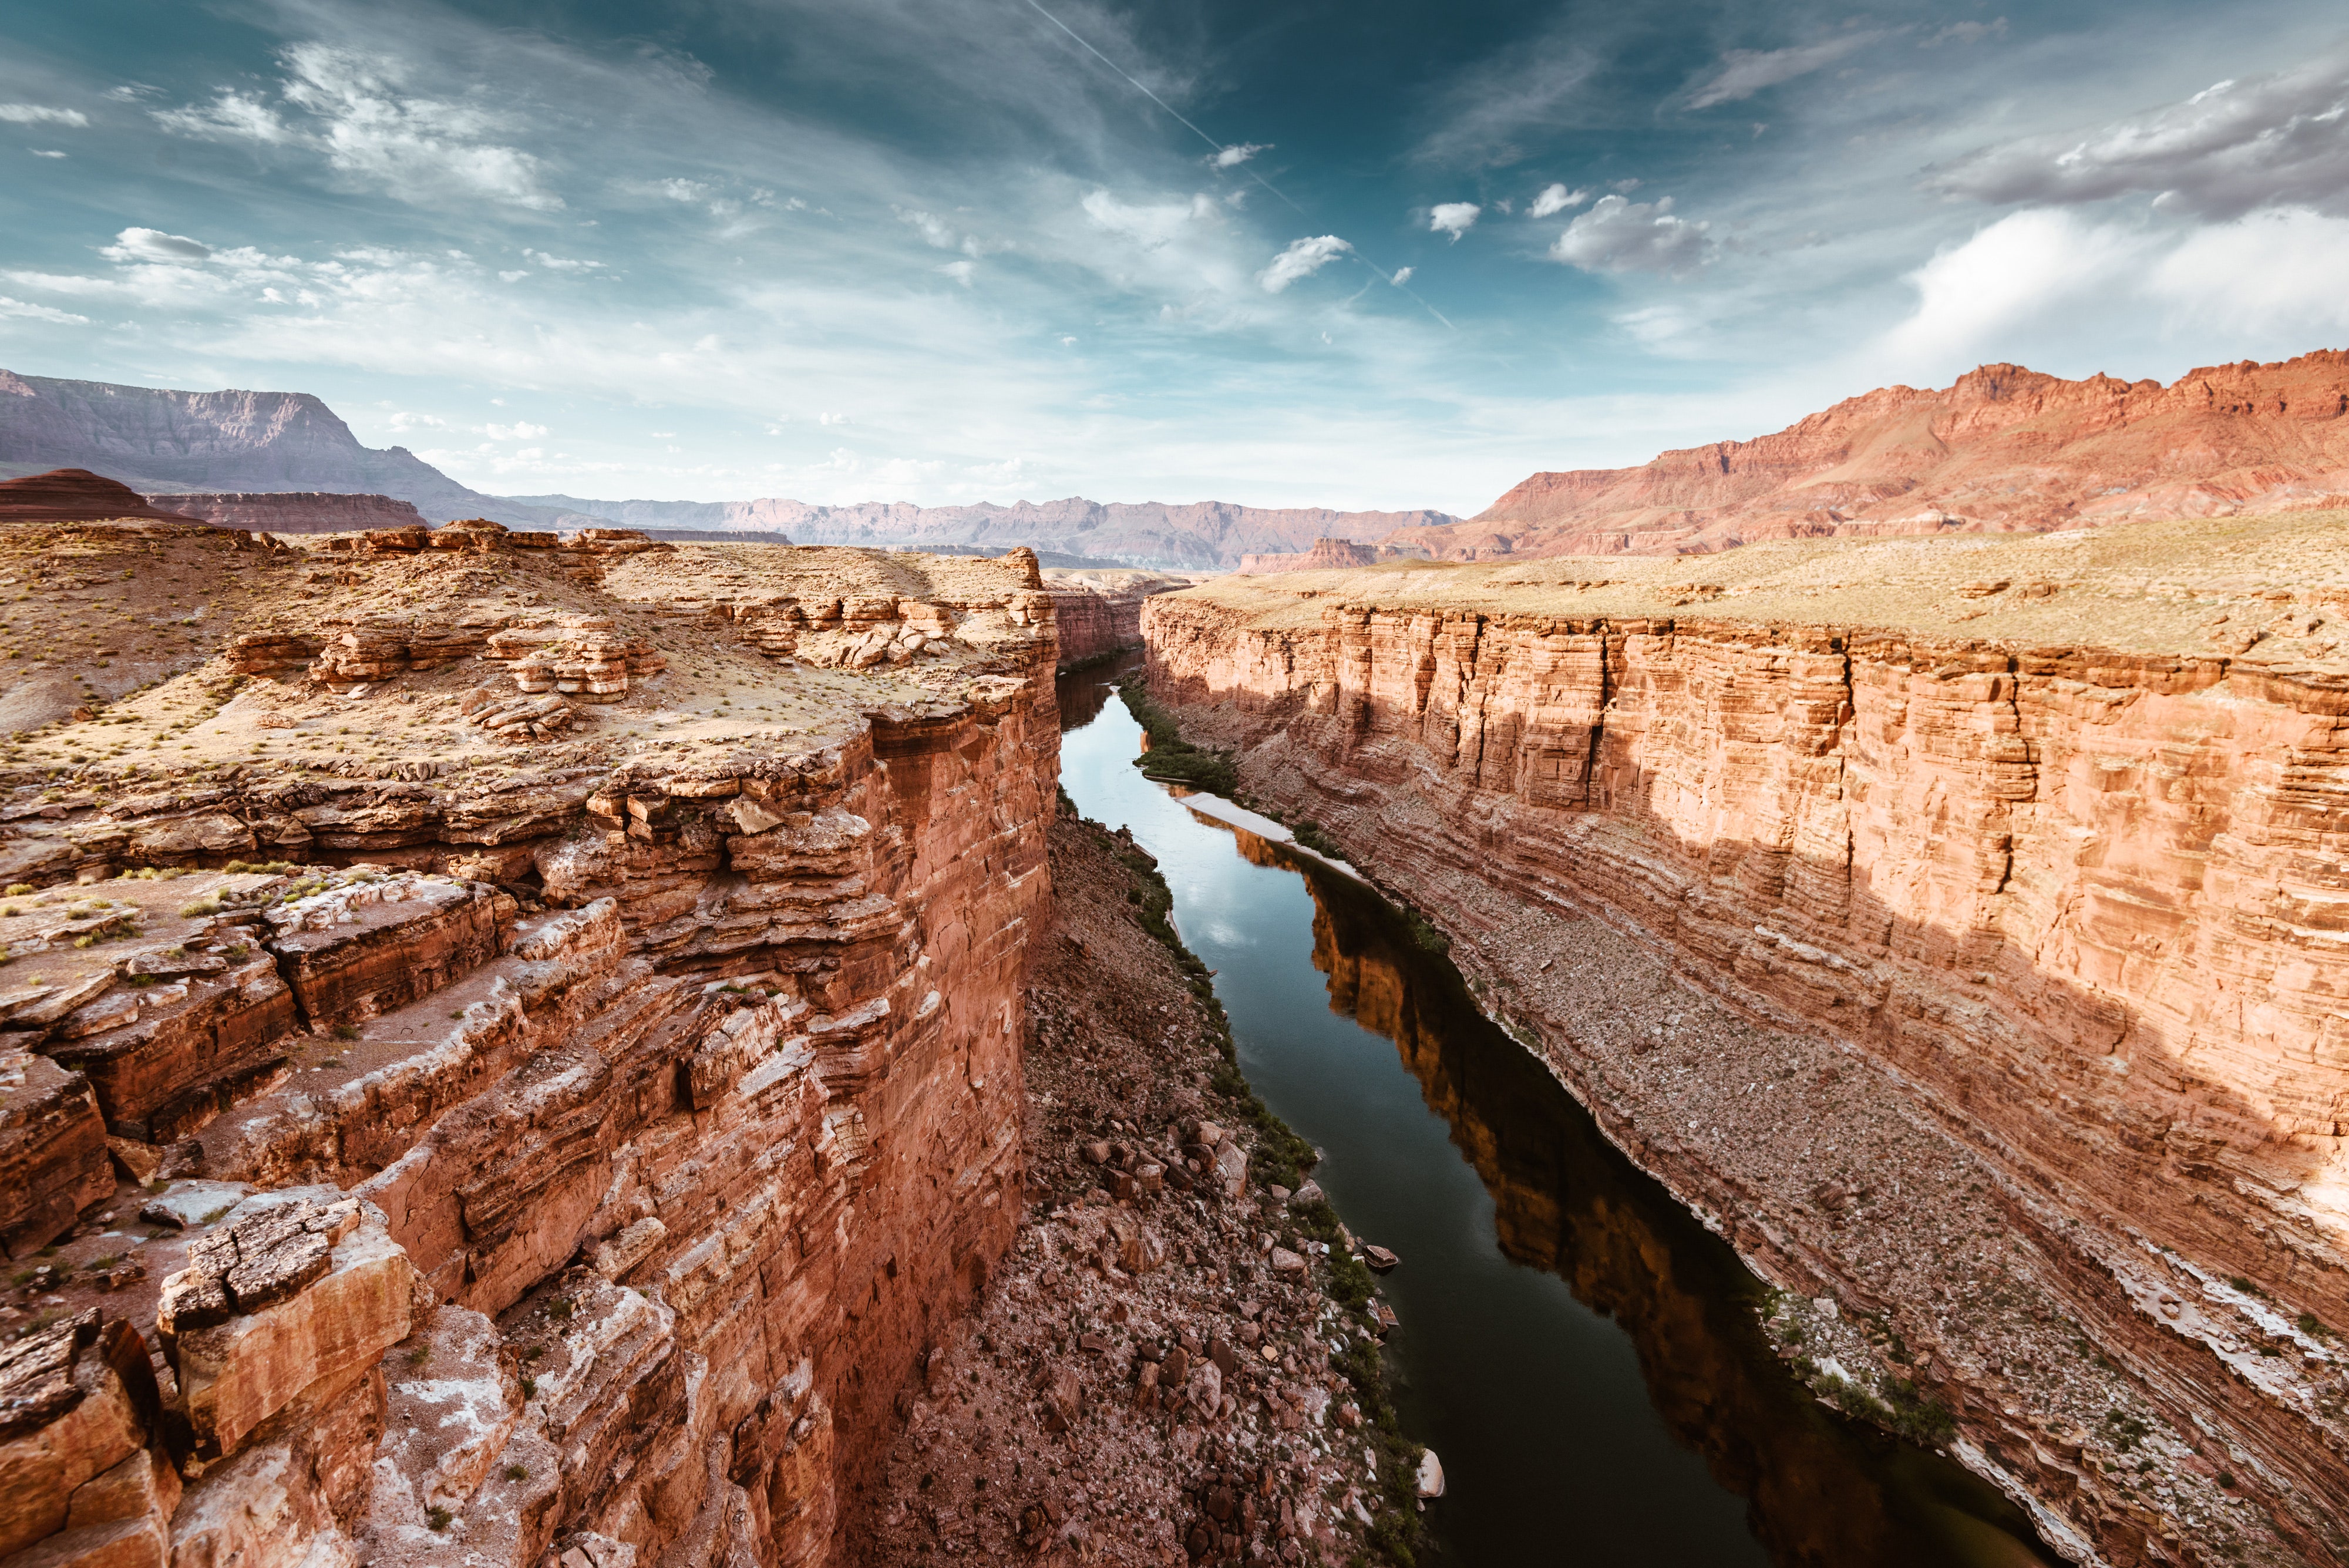 Grand Canyon National Park, often called one of the Seven Natural Wonders of the World, is on most travelers’ lists for a reason. Plan to hike some of the park’s <a href="https://www.cntraveler.com/gallery/best-grand-canyon-hikes?mbid=synd_msn_rss&utm_source=msn&utm_medium=syndication">most scenic loops</a>—like Horseshoe Bend and the South Rim Trail—to get views of the rocky badlands of the Painted Desert, Navajo Nation, and even a waterfall or two.<p>Sign up to receive the latest news, expert tips, and inspiration on all things travel</p><a href="https://www.cntraveler.com/newsletter/the-daily?sourceCode=msnsend">Inspire Me</a>